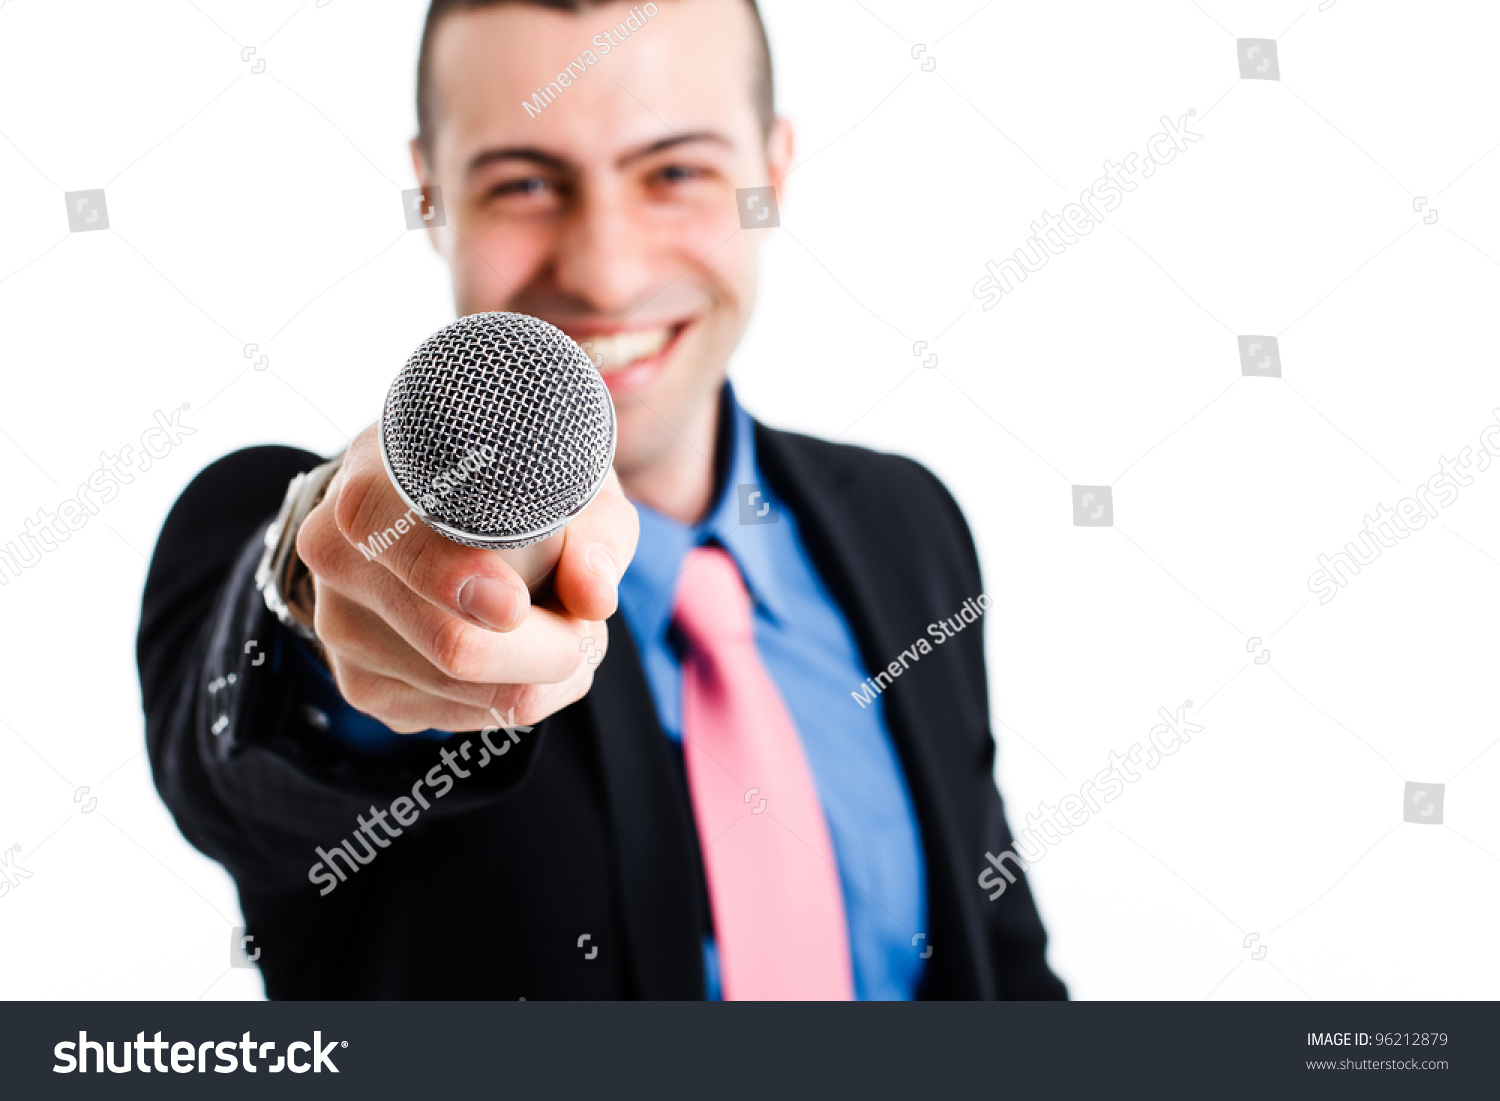 stock-photo-handsome-smiling-man-holding-a-microphone-96212879.jpg